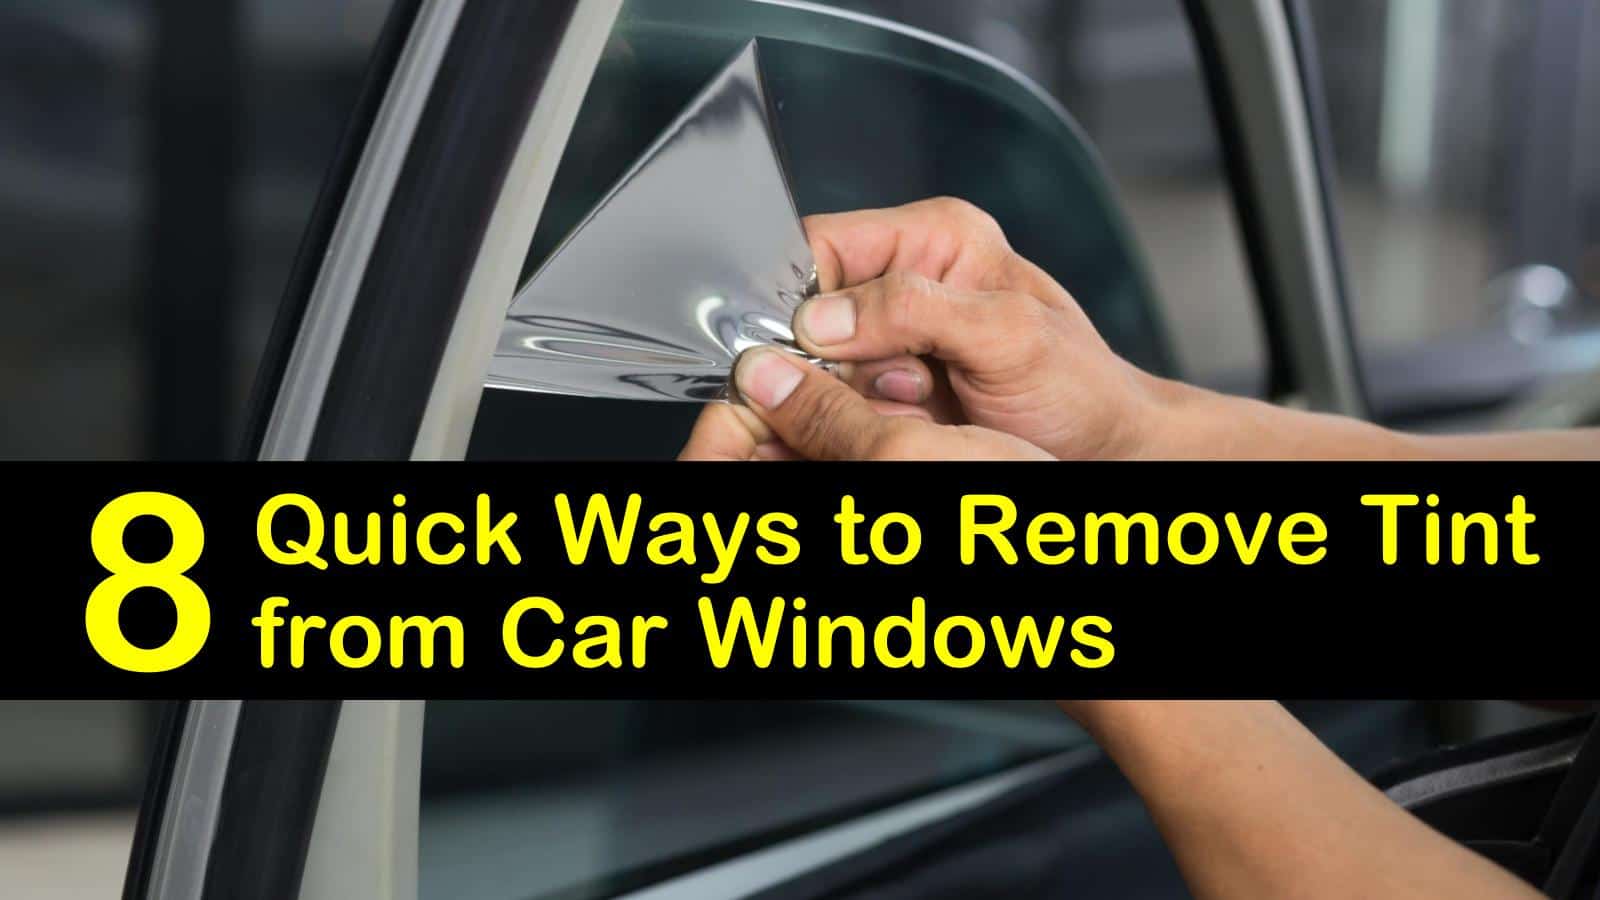 how to remove tint from car windows titleimg1